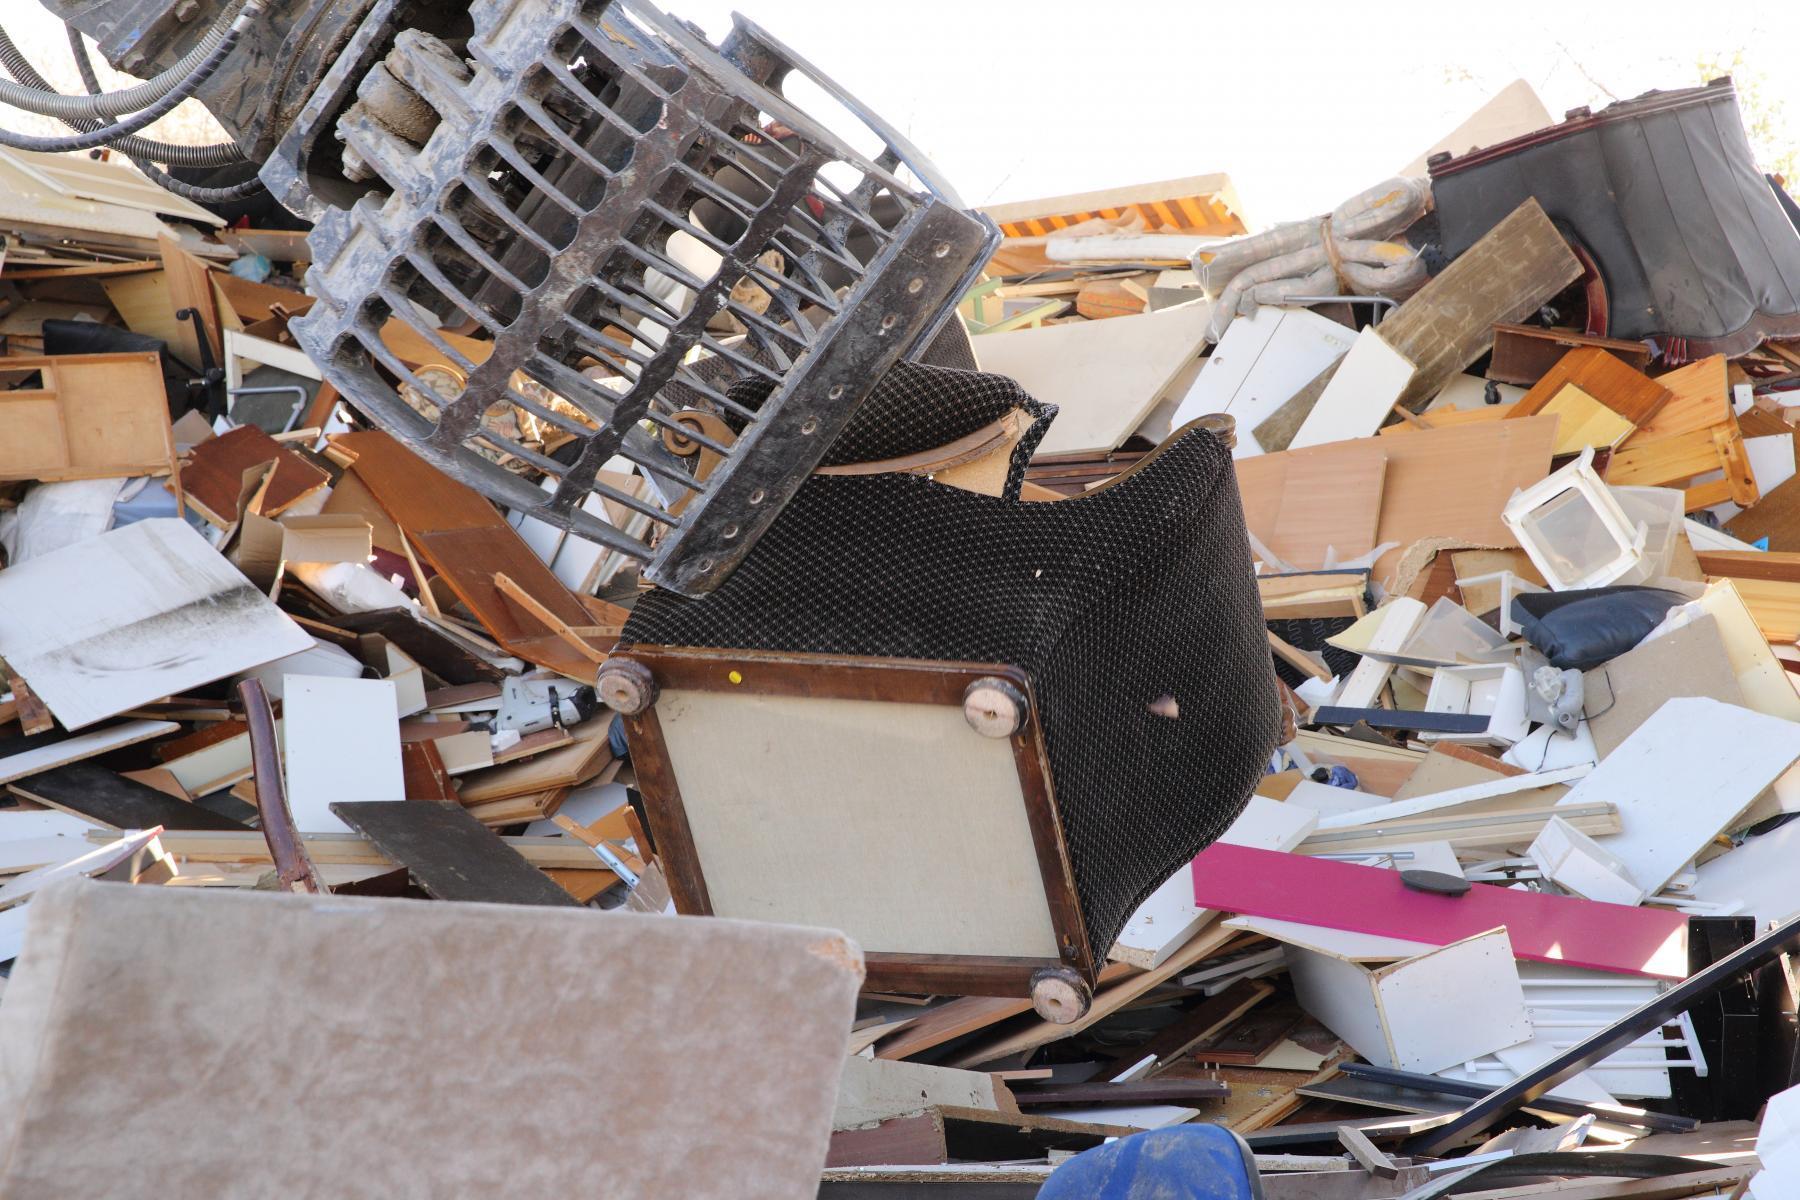 400,000 metric tons of urban furniture recovered and recycled